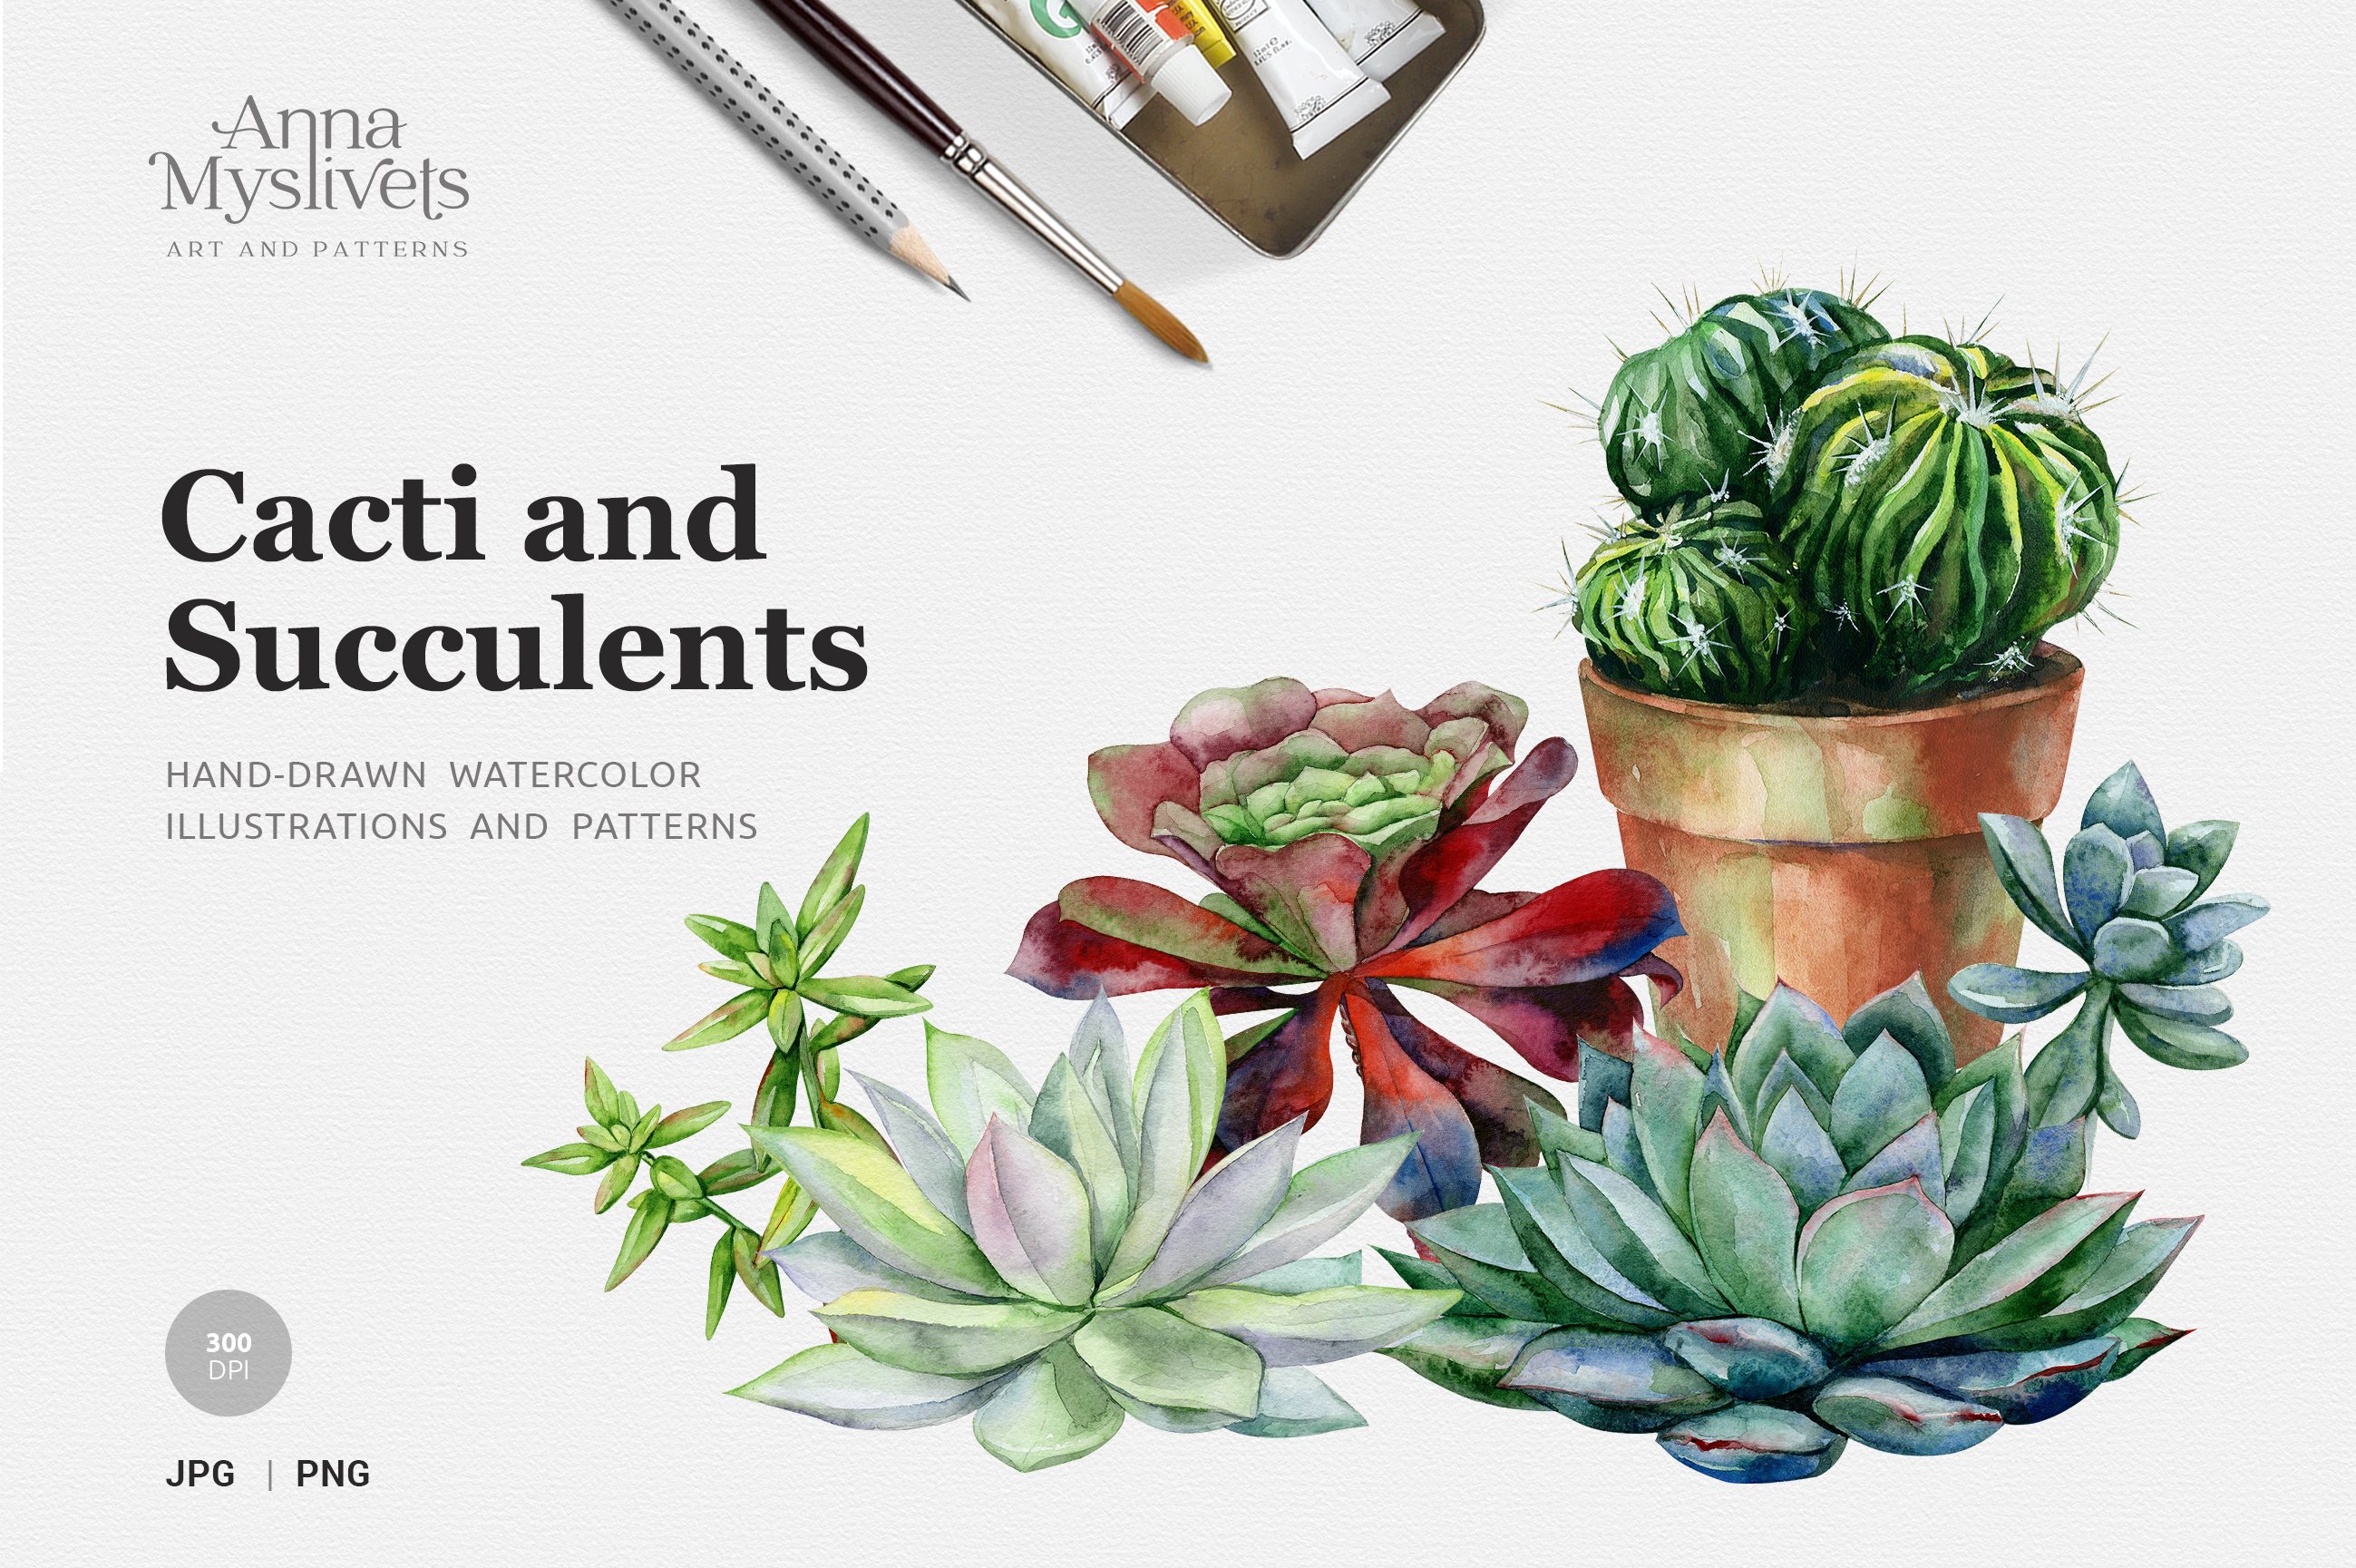 Cacti & Succulents cover image.